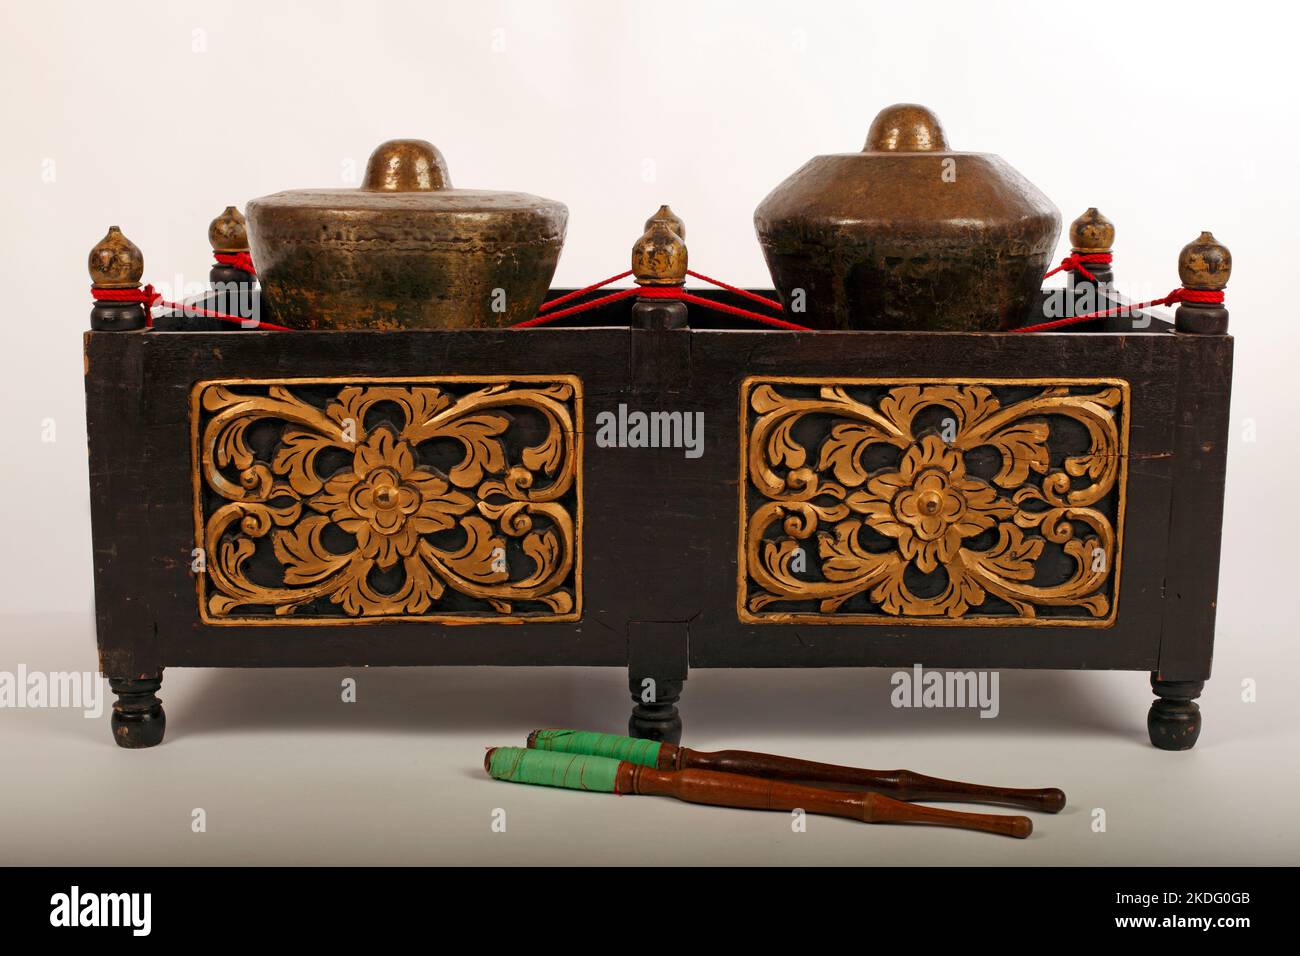 Bonang,  an Indonesian musical instrument used in the Javanese gamelan. Bronze gongs balanced on string with a decorative wooden frame. With beaters. Stock Photo